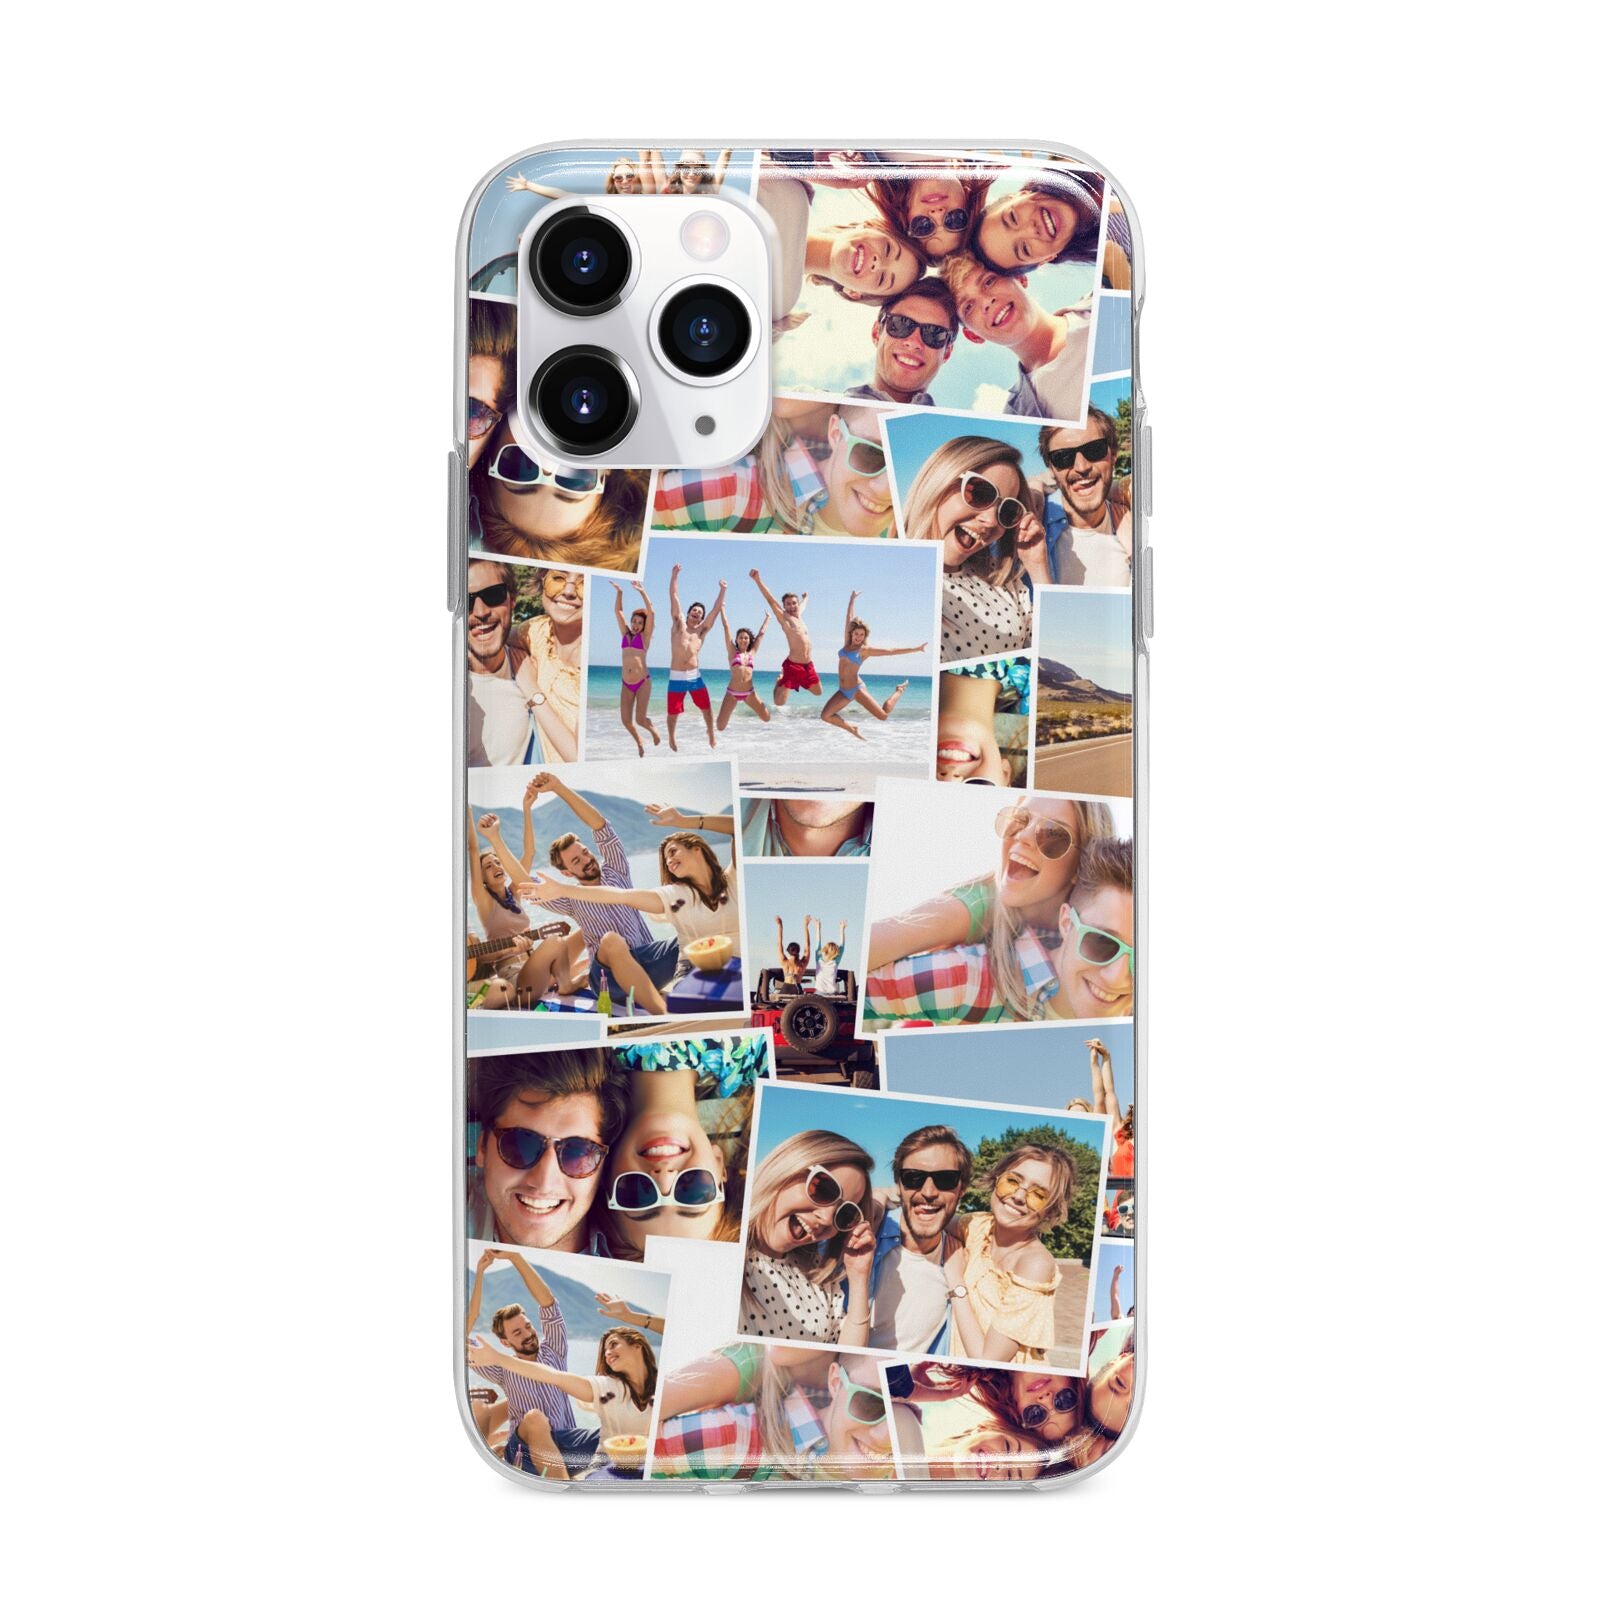 Photo Montage Apple iPhone 11 Pro Max in Silver with Bumper Case